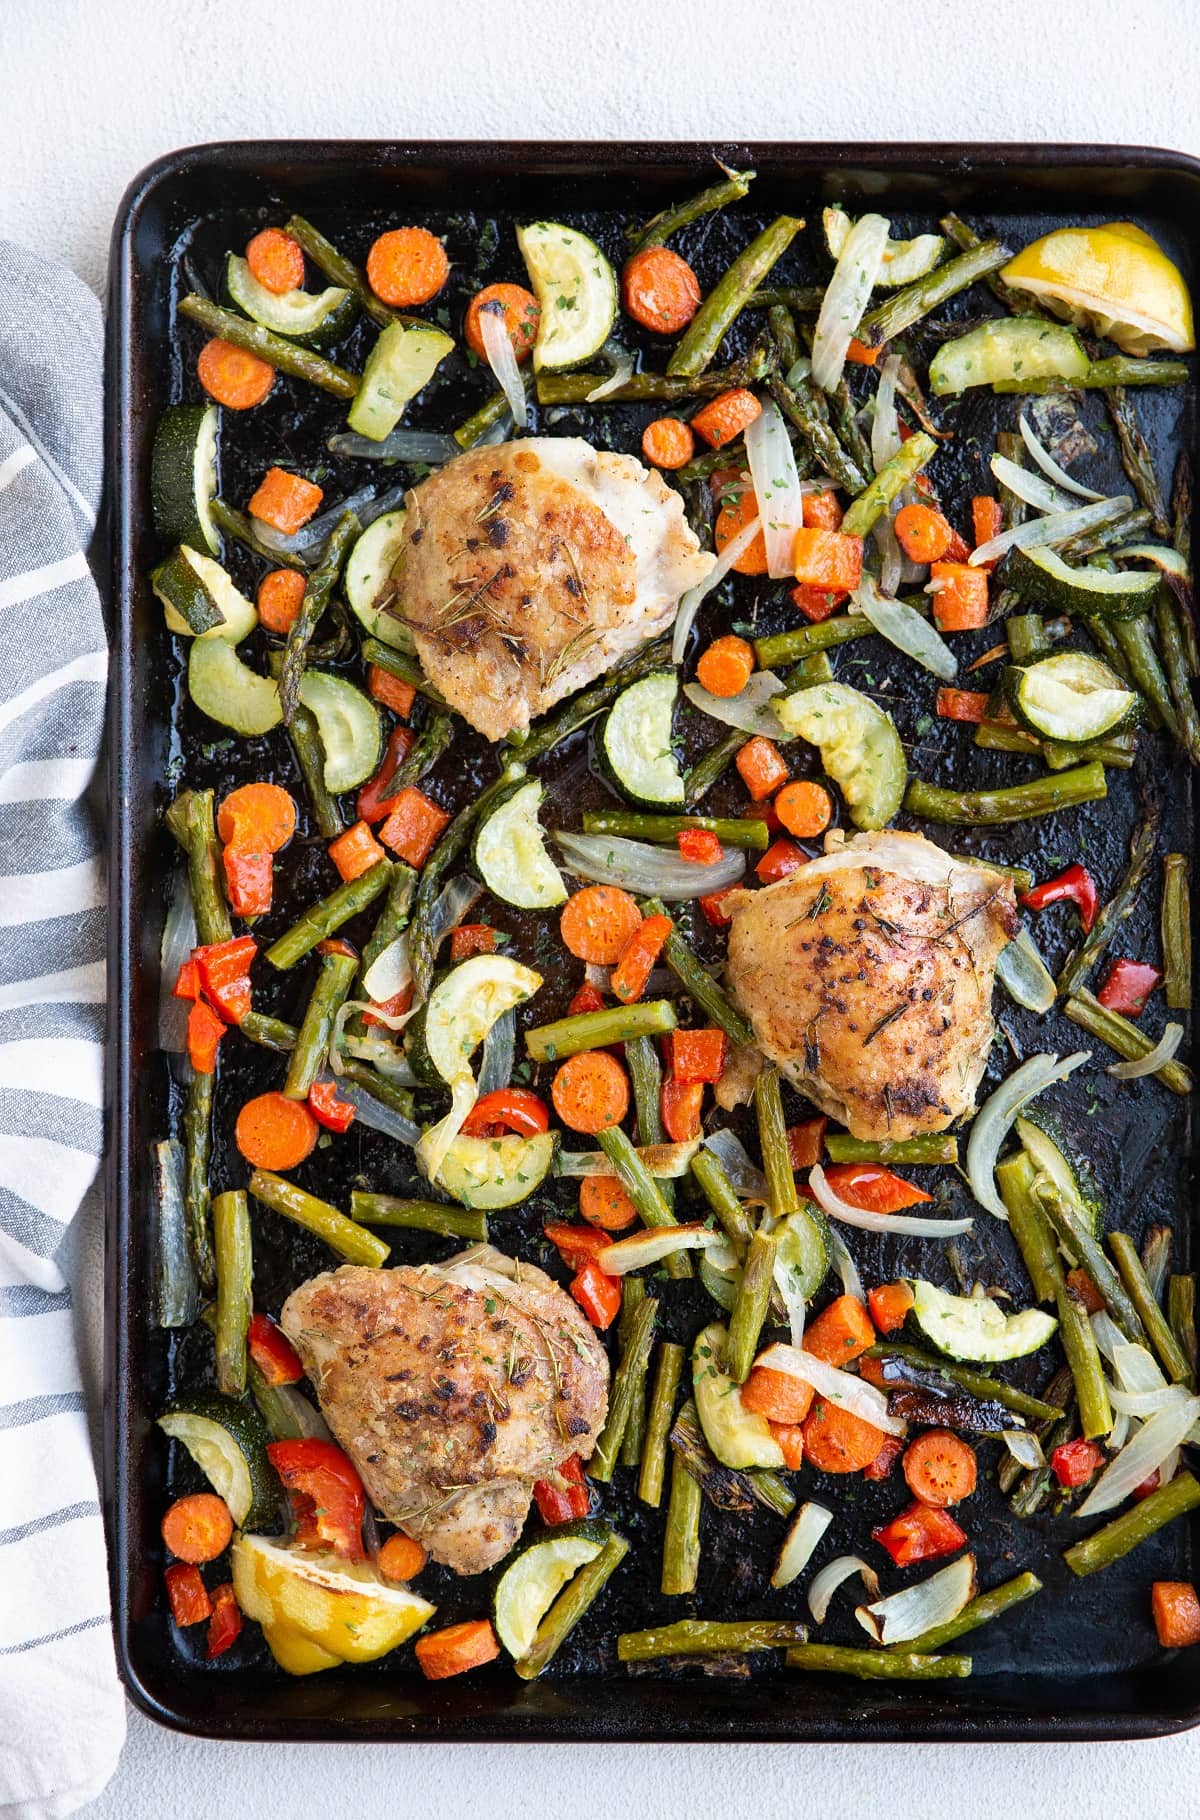 Large sheet pan of veggies and chicken thighs fresh out of the oven.